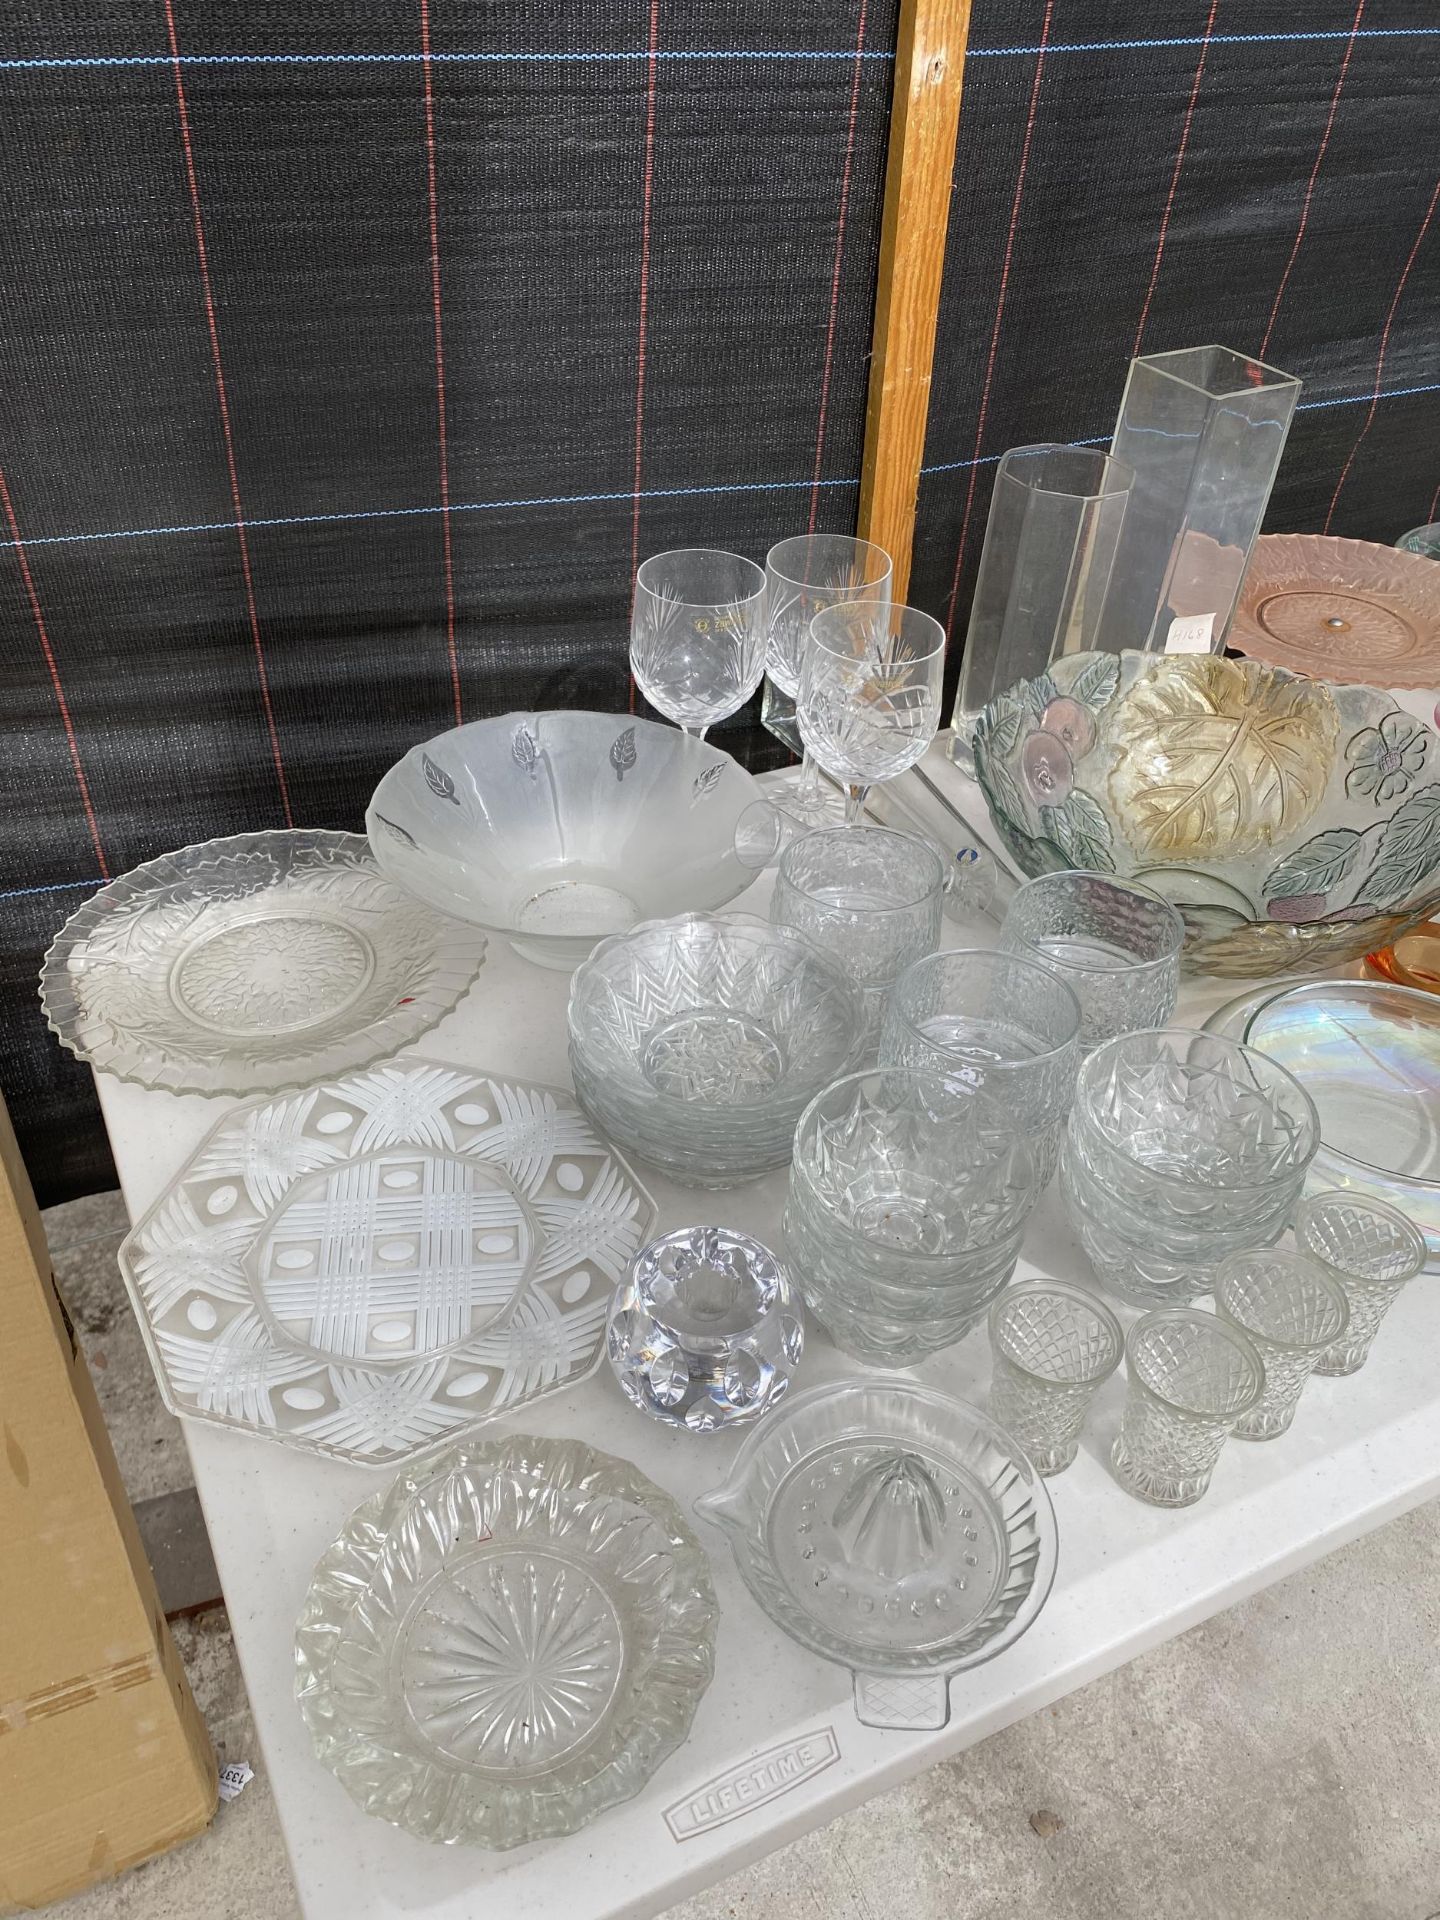 AN ASSORTMENT OF GLASS WARE TO INCLUDE A PIUNCH BOWL, CAKE STAND AND RAMEKINS ETC - Image 4 of 4